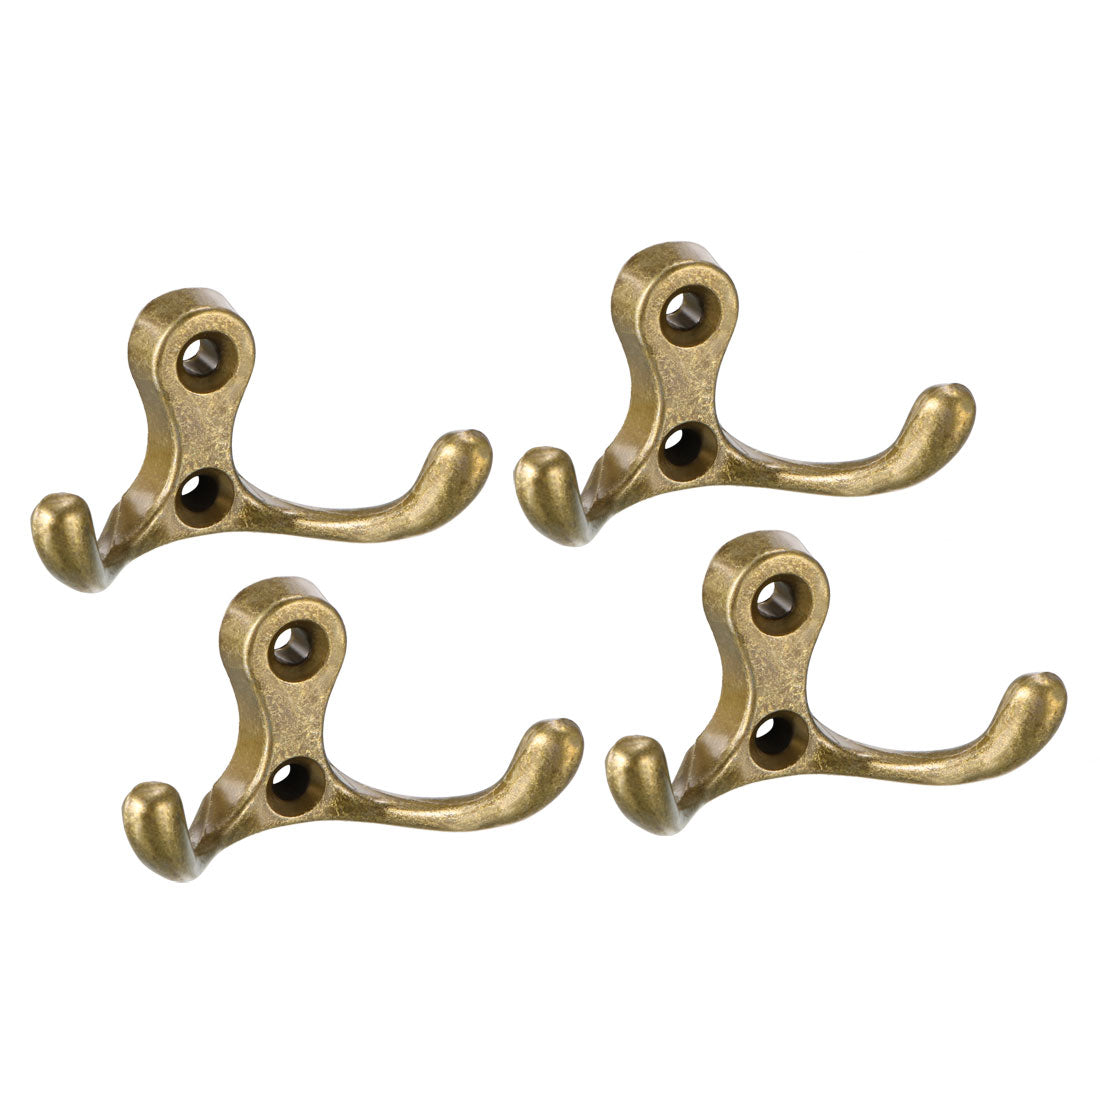 uxcell Uxcell Dual Prong Coat Hooks Wall Mounted Retro Double Hooks Utility Antique Bronze Hook for Coat Scarf Bag Towel Key Cap Cup Hat 30mm x 55mm x 29mm 4pcs